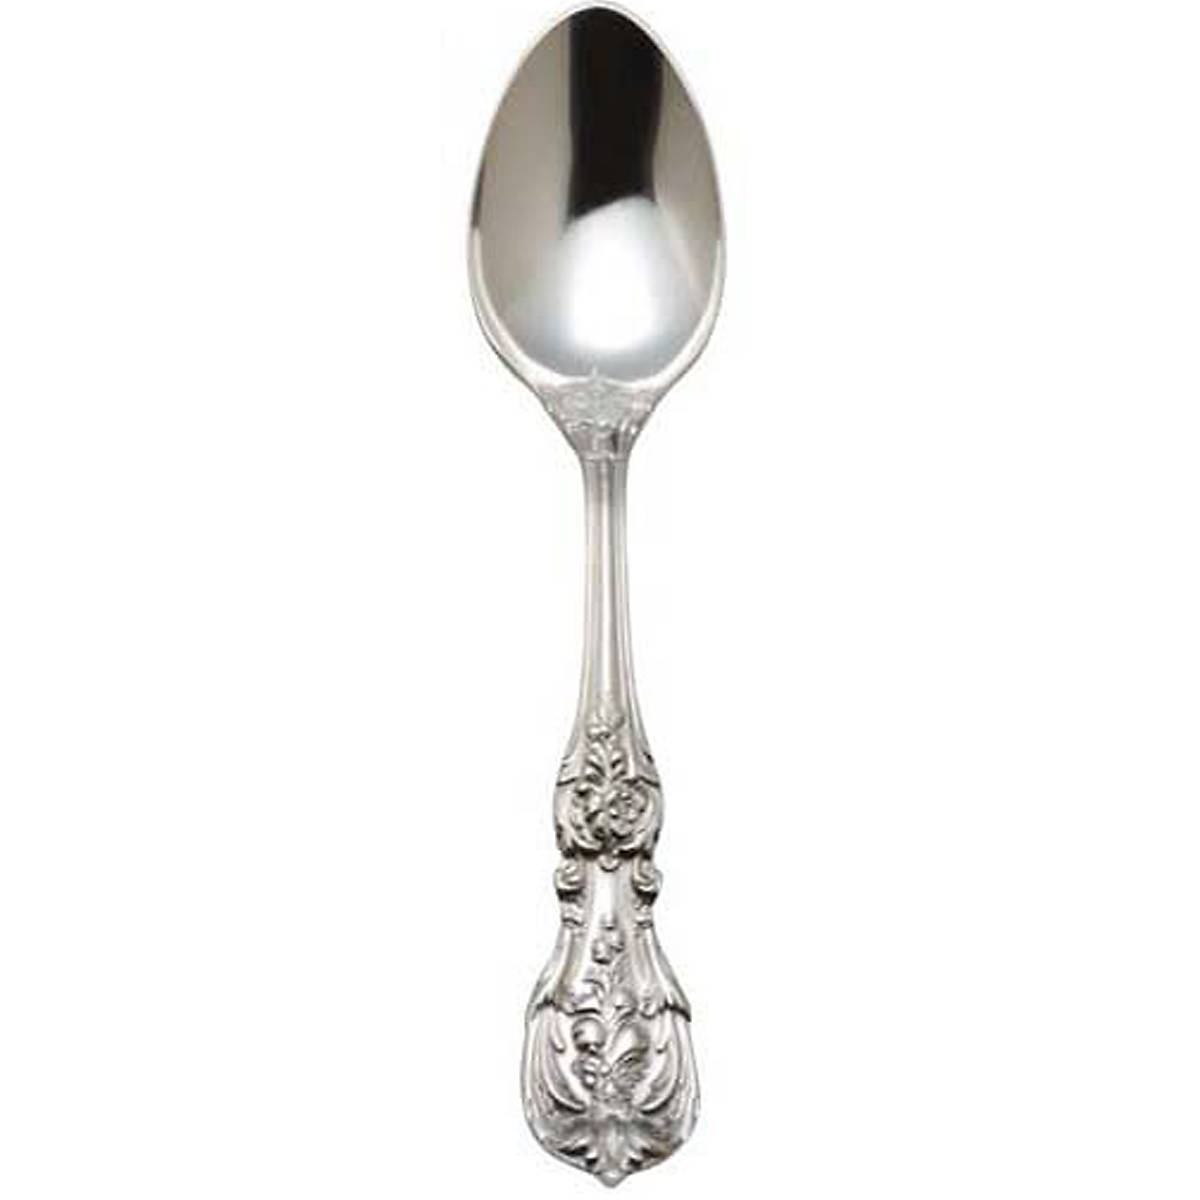 Francis 1st Teaspoon By Reed & Barton Sterling Silver 5-7/8 Inch 